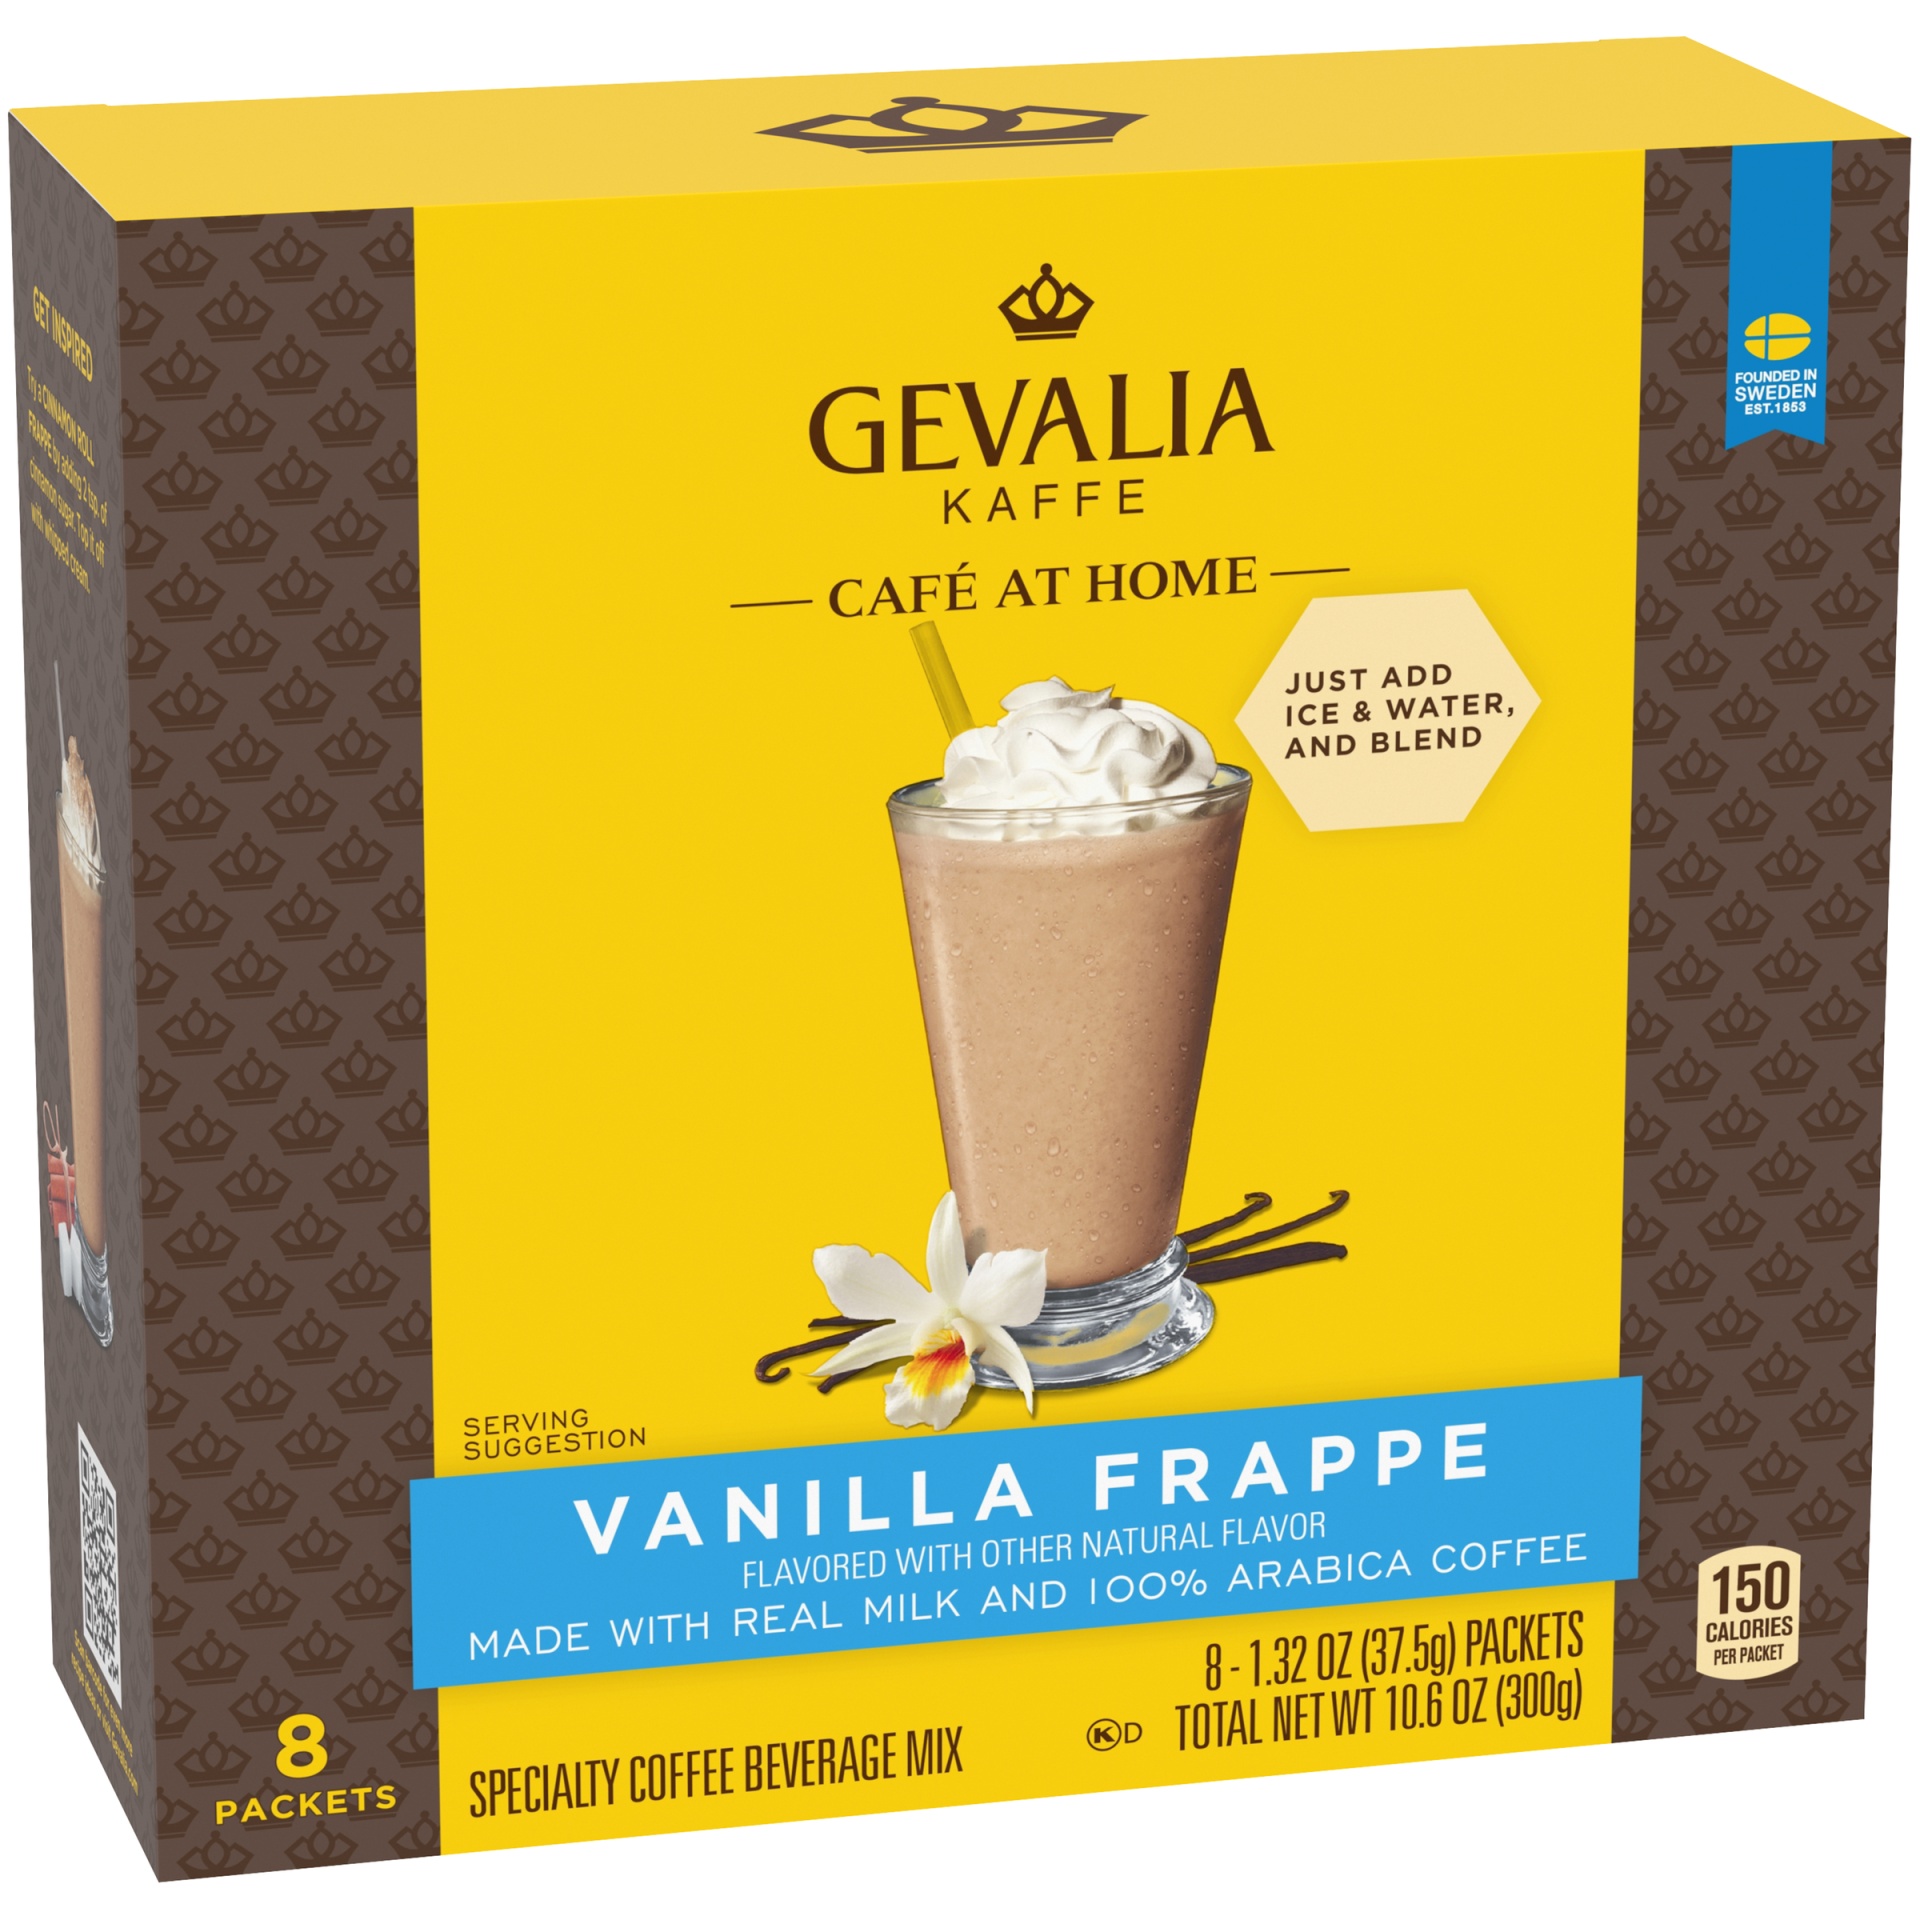 slide 2 of 6, Gevalia Cafe at Home Vanilla Frappe Instant Coffee Specialty Beverage Mix Kit, 8 ct